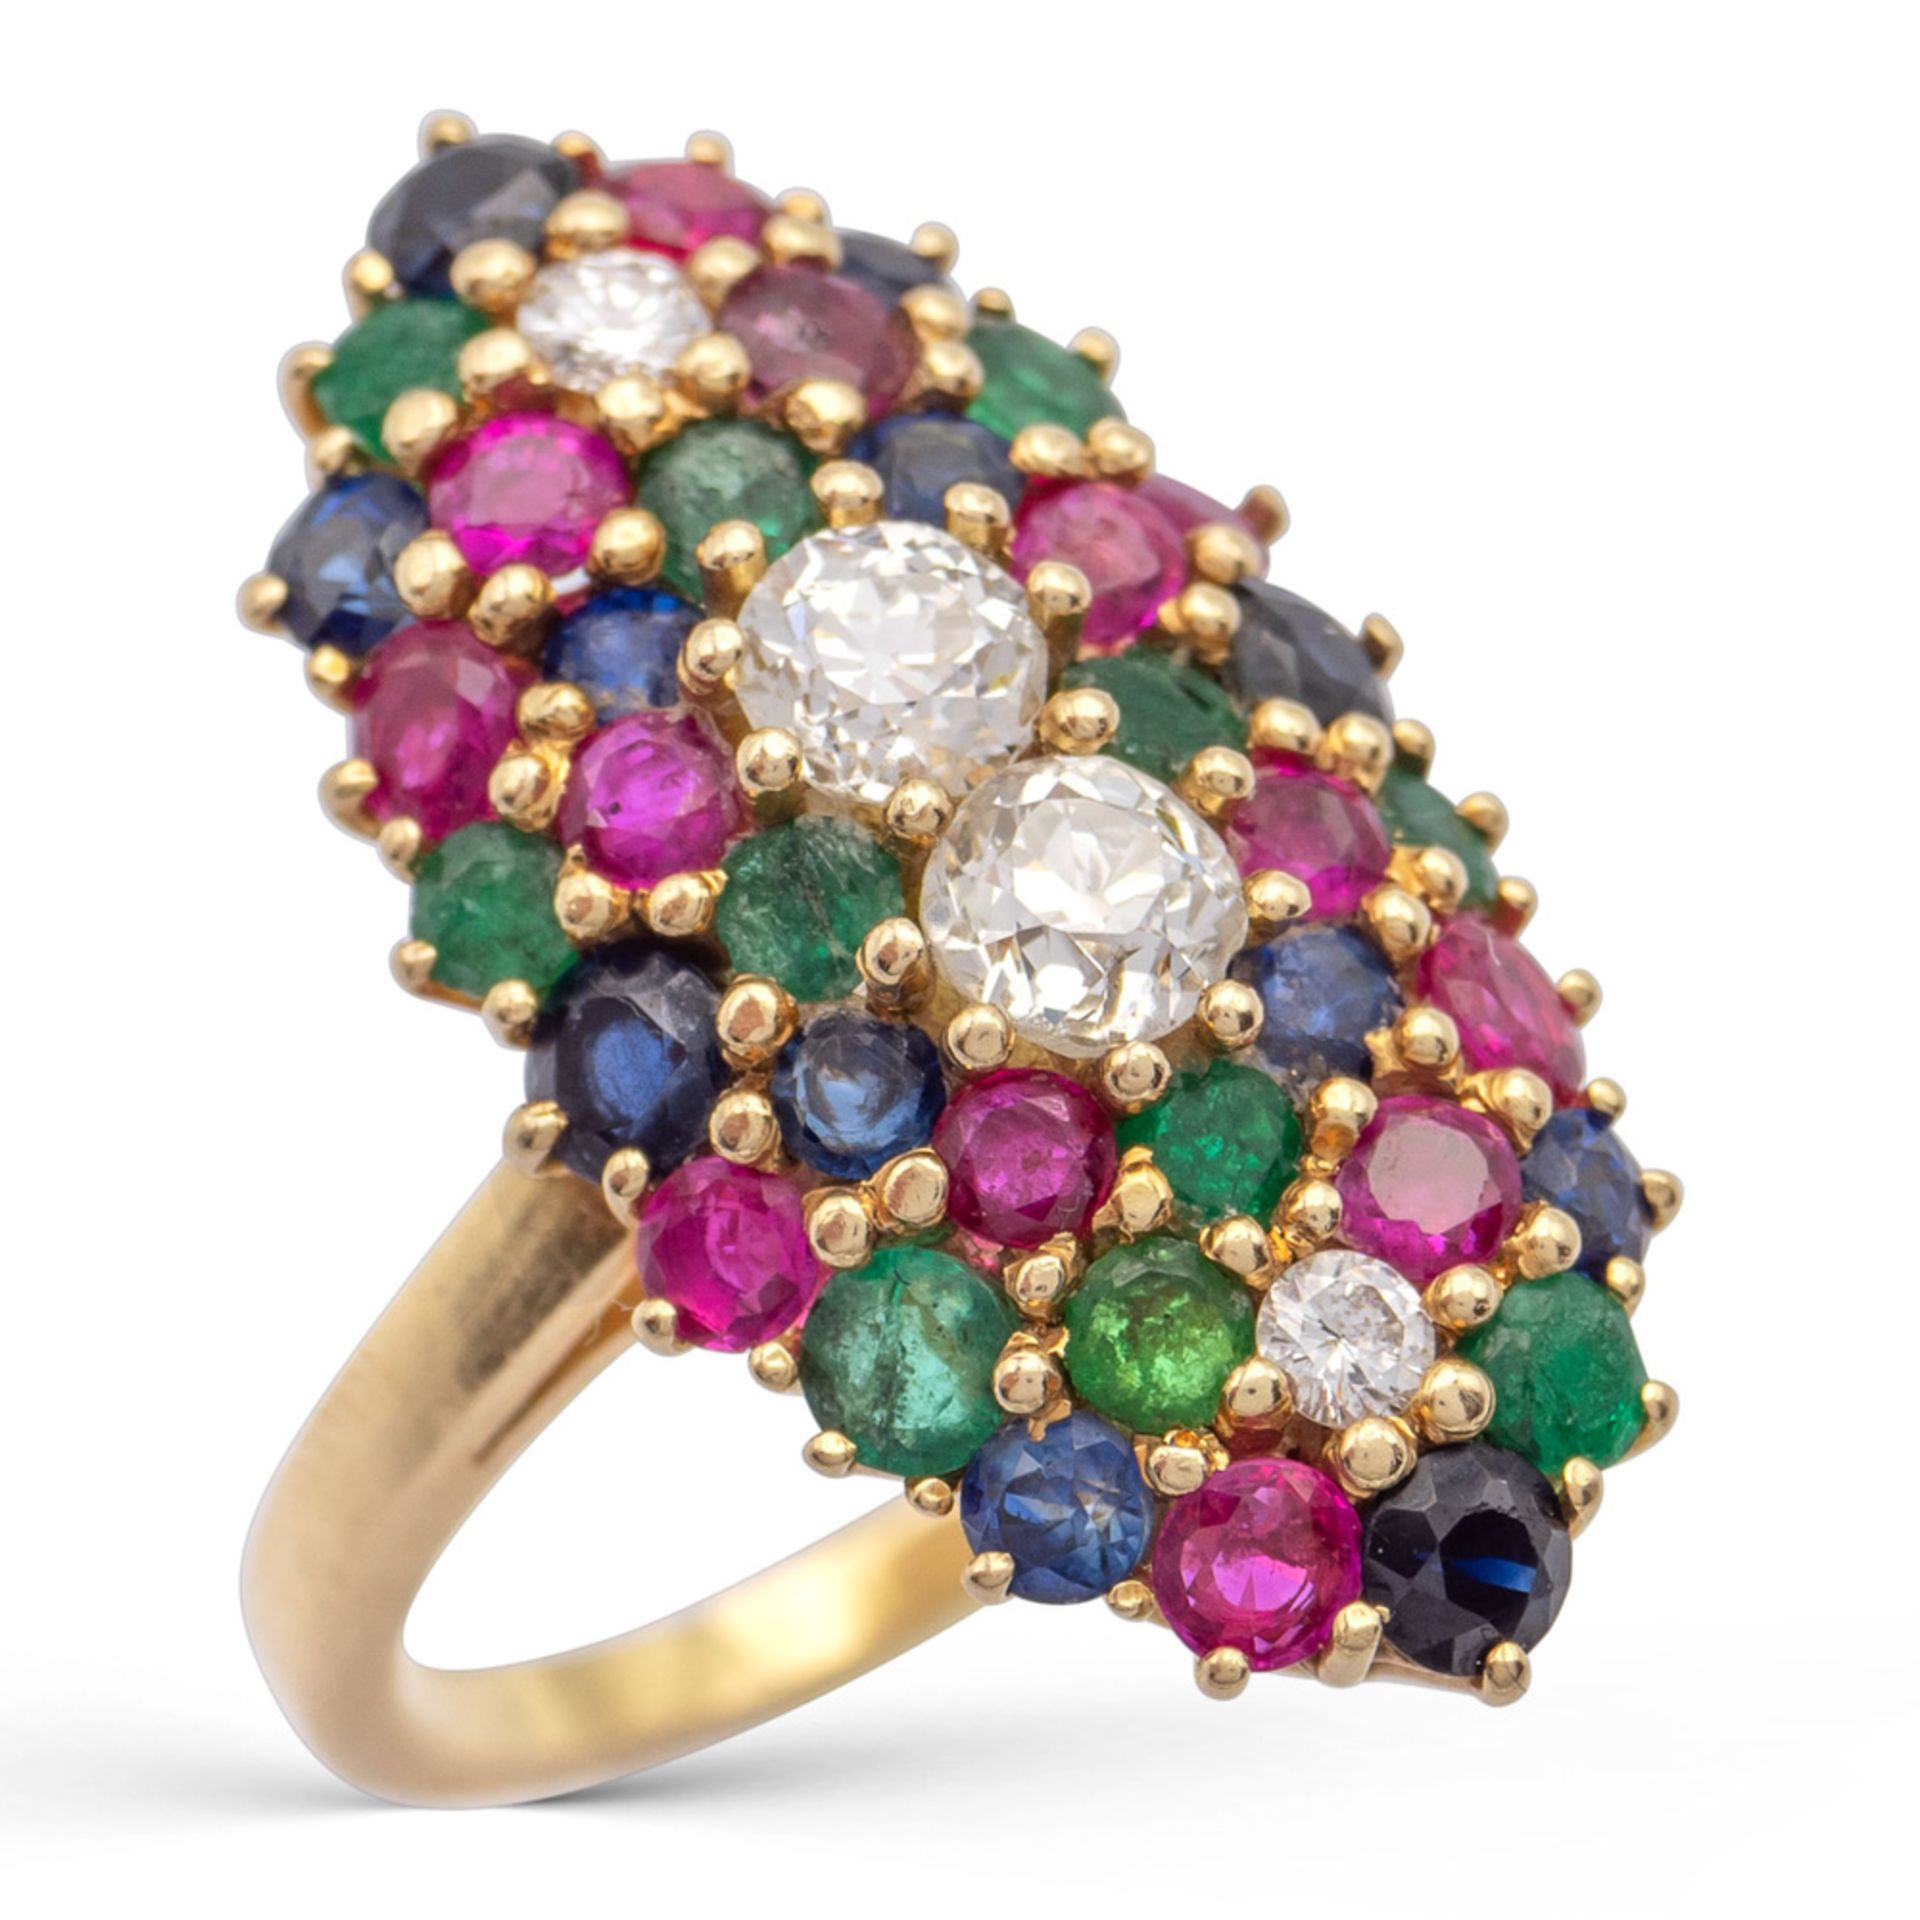 18kt yellow gold, diamonds, sapphires, rubies and emeralds ring 1950/60s weight 9,3 gr.